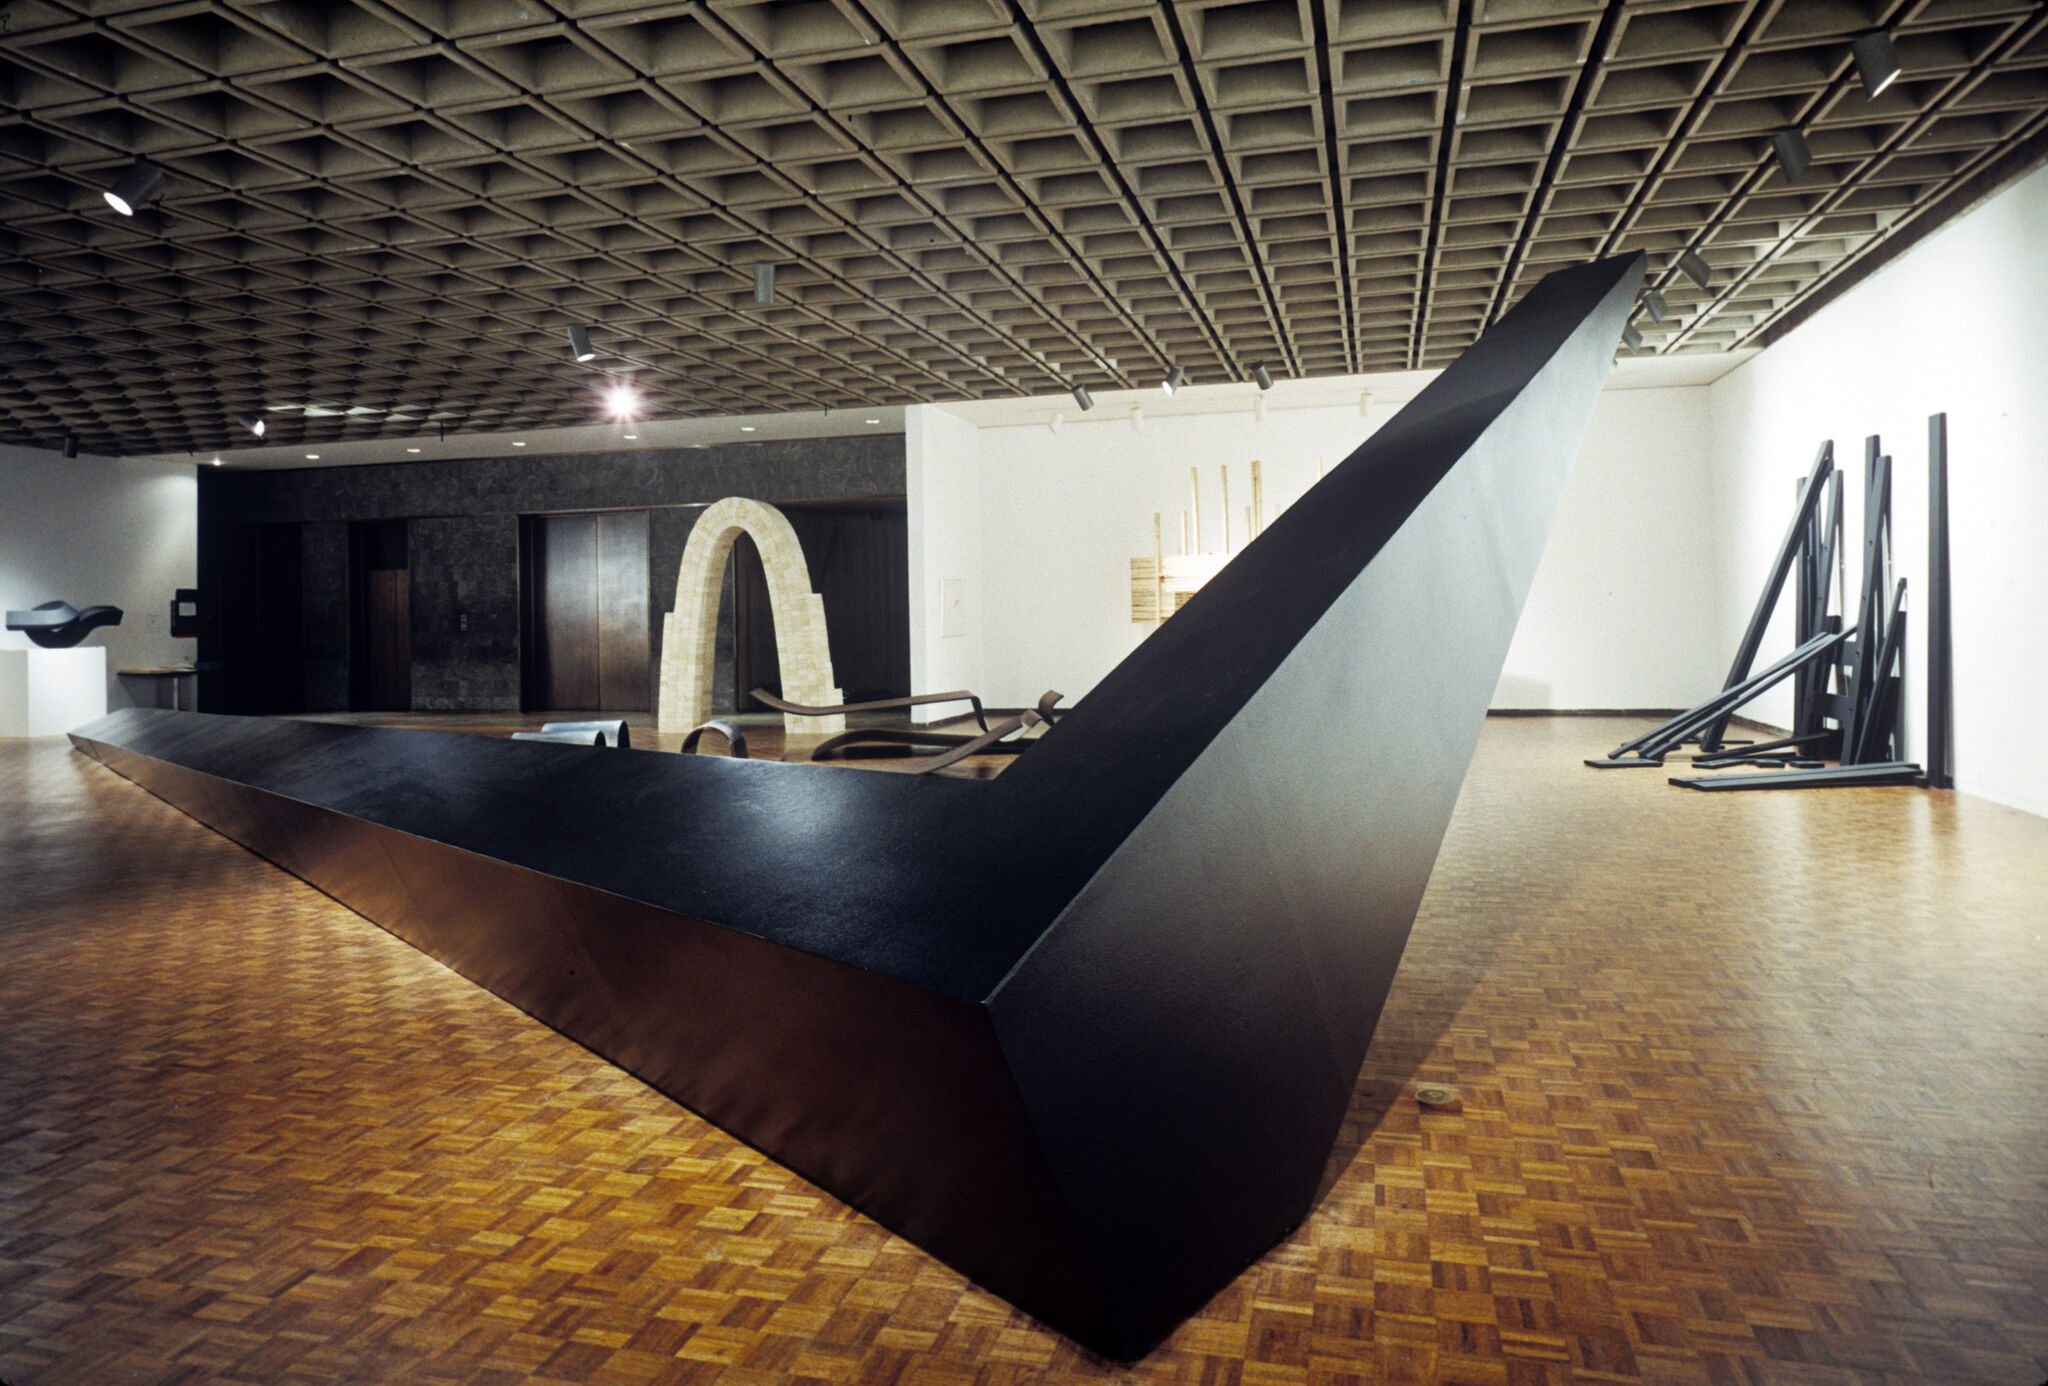 Large, angular metal sculpture in a gallery.